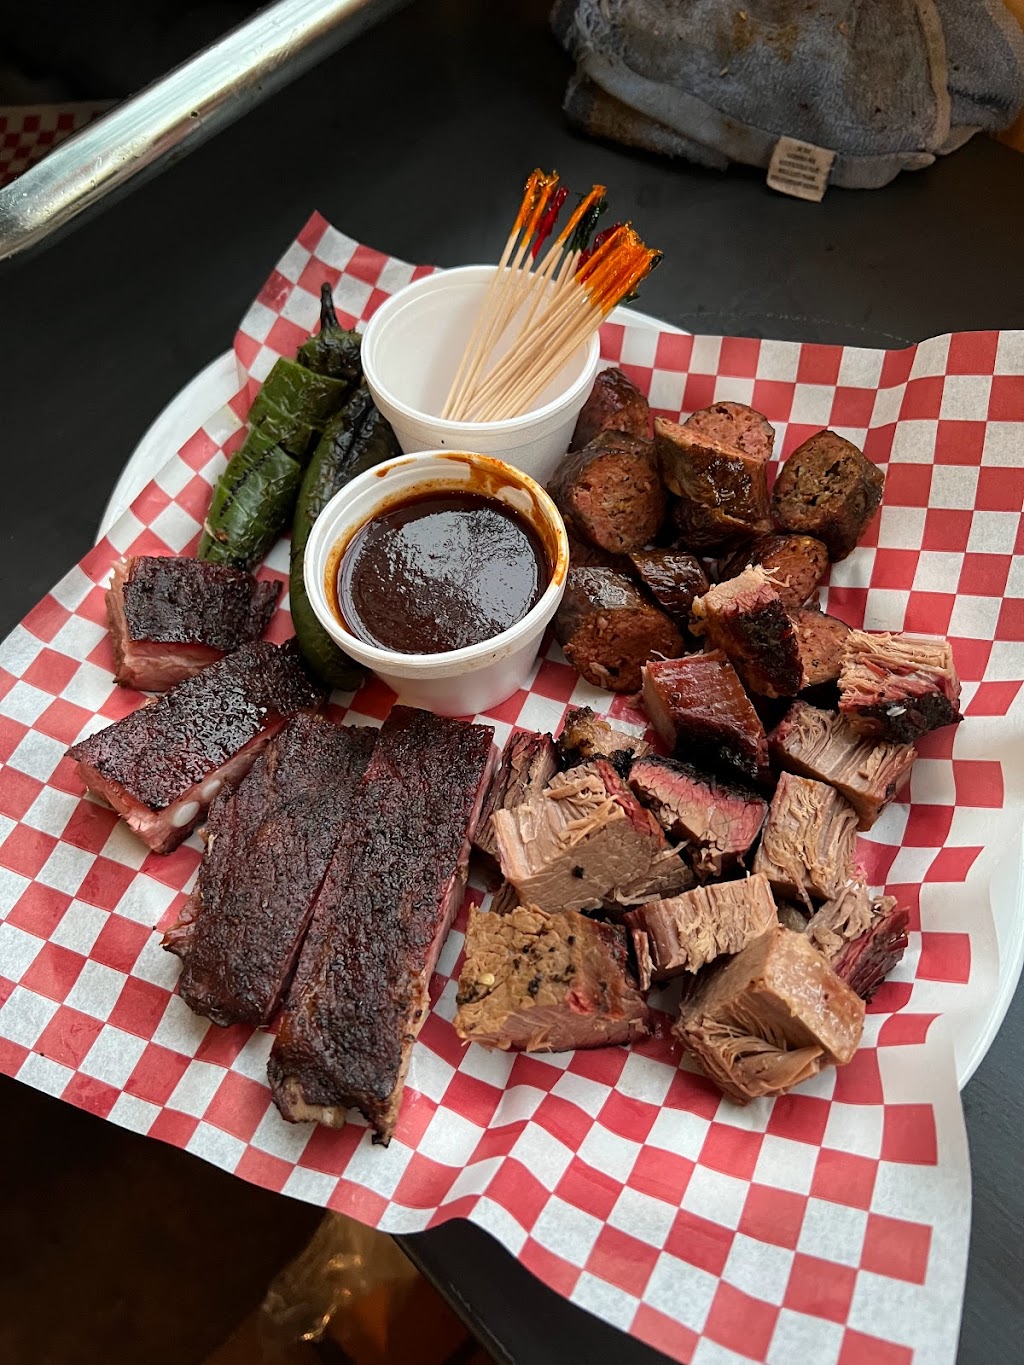 Tommys BBQ Company | 1414 Harbour Way S Ste 4000, Richmond, CA 94804, USA | Phone: (510) 860-7894